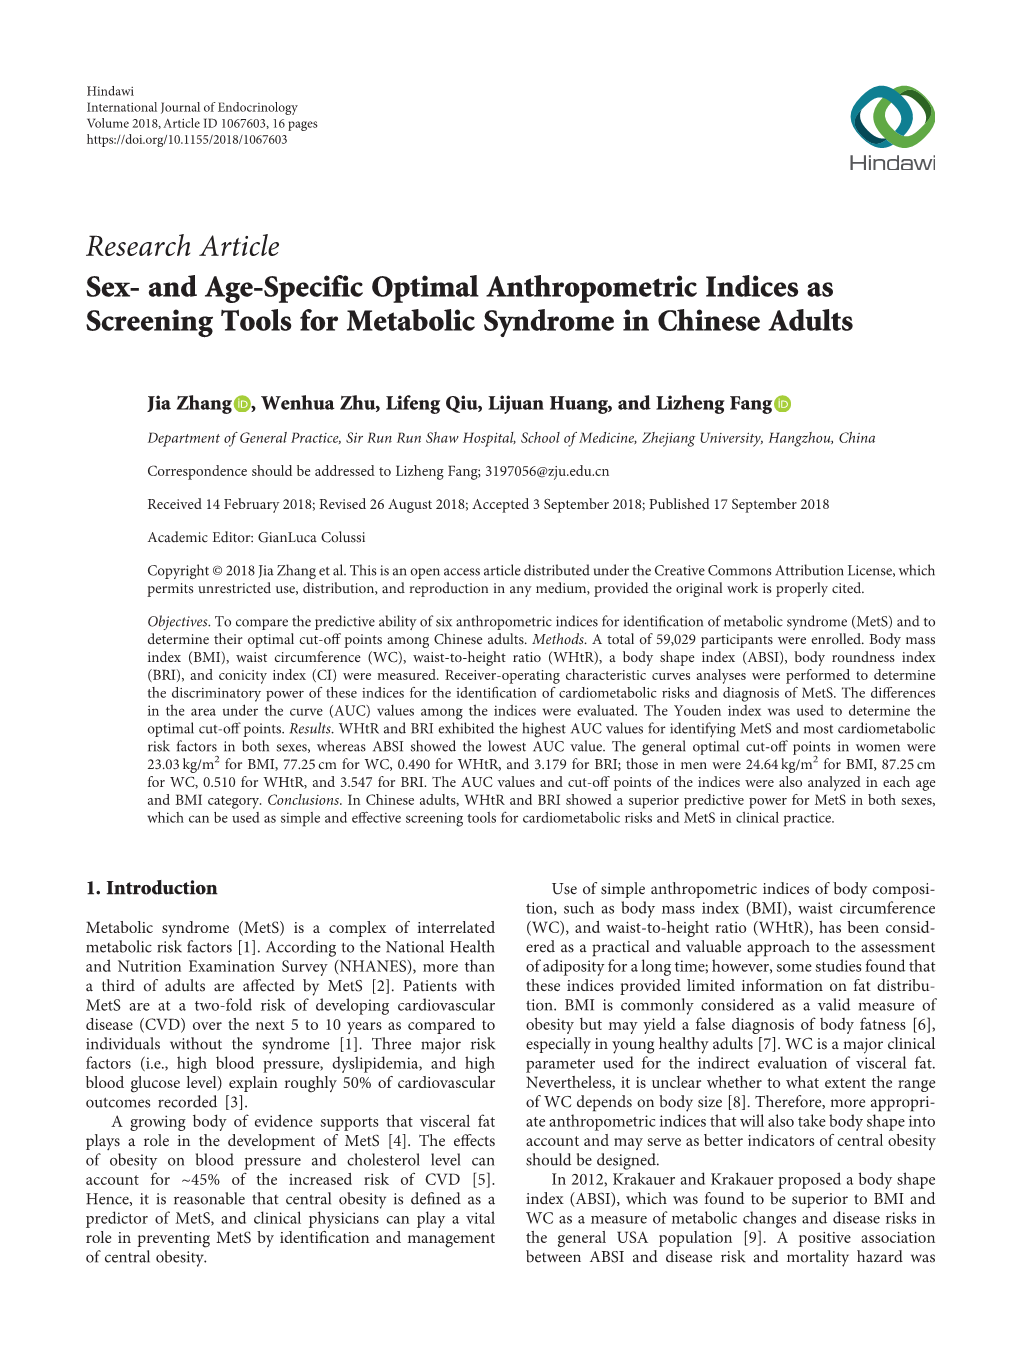 Sex-And Age-Specific Optimal Anthropometric Indices As